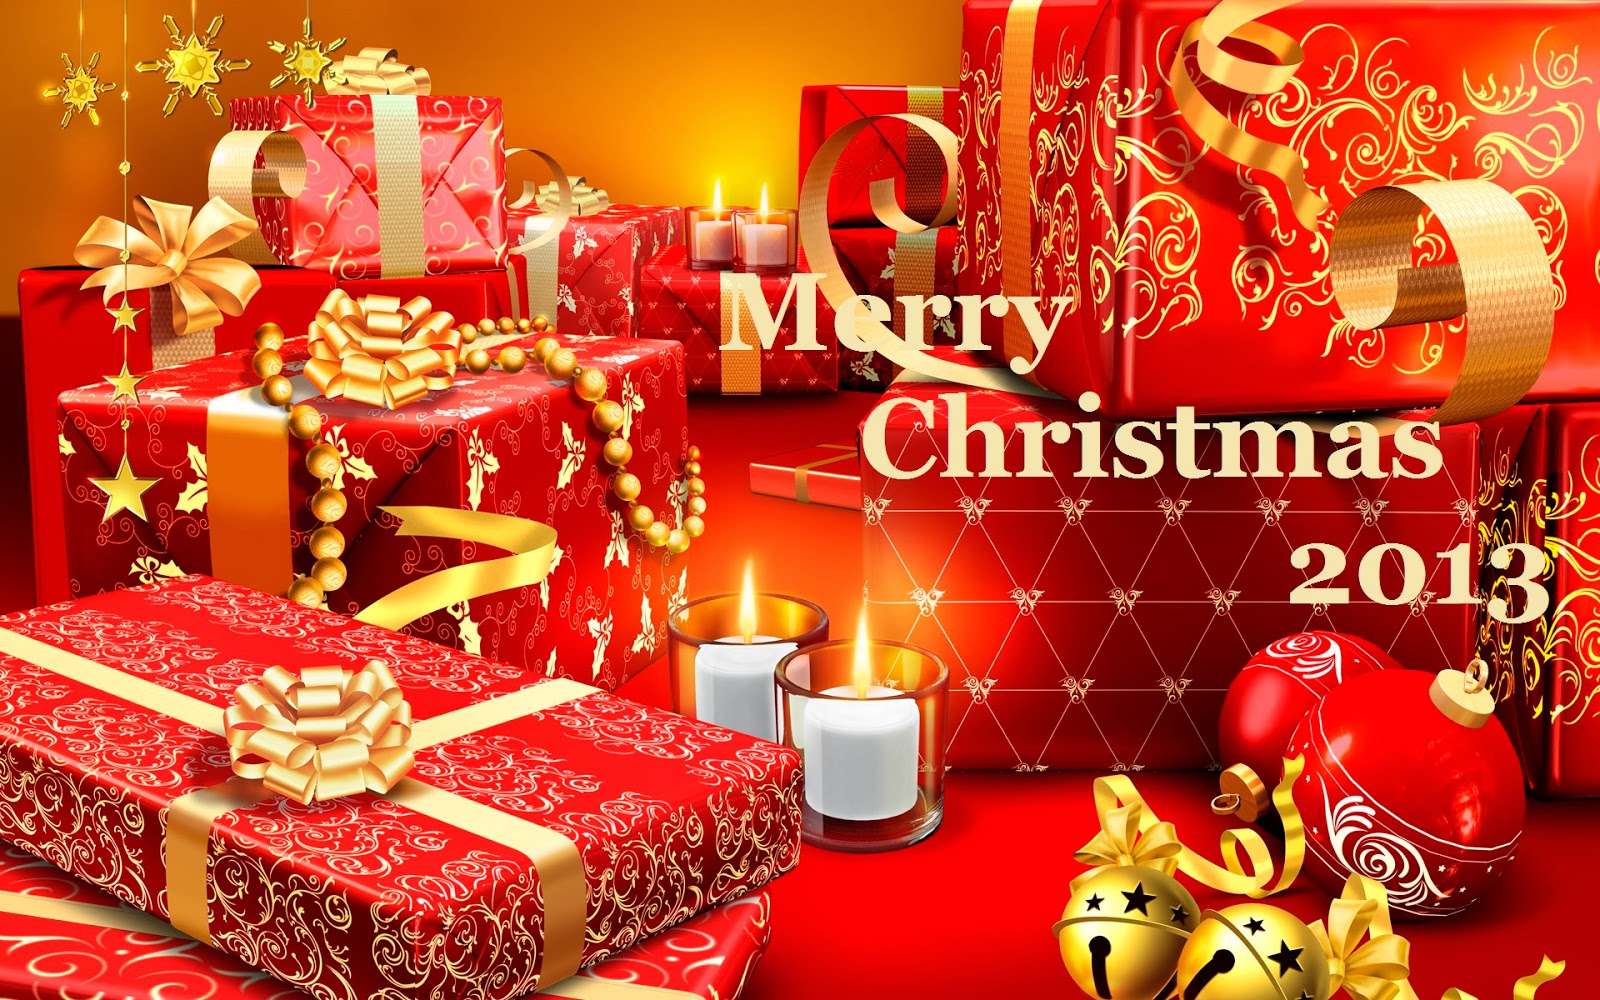 Merry Christmas 2013 Pictures | Best Collection of Merry Christmas Pictures